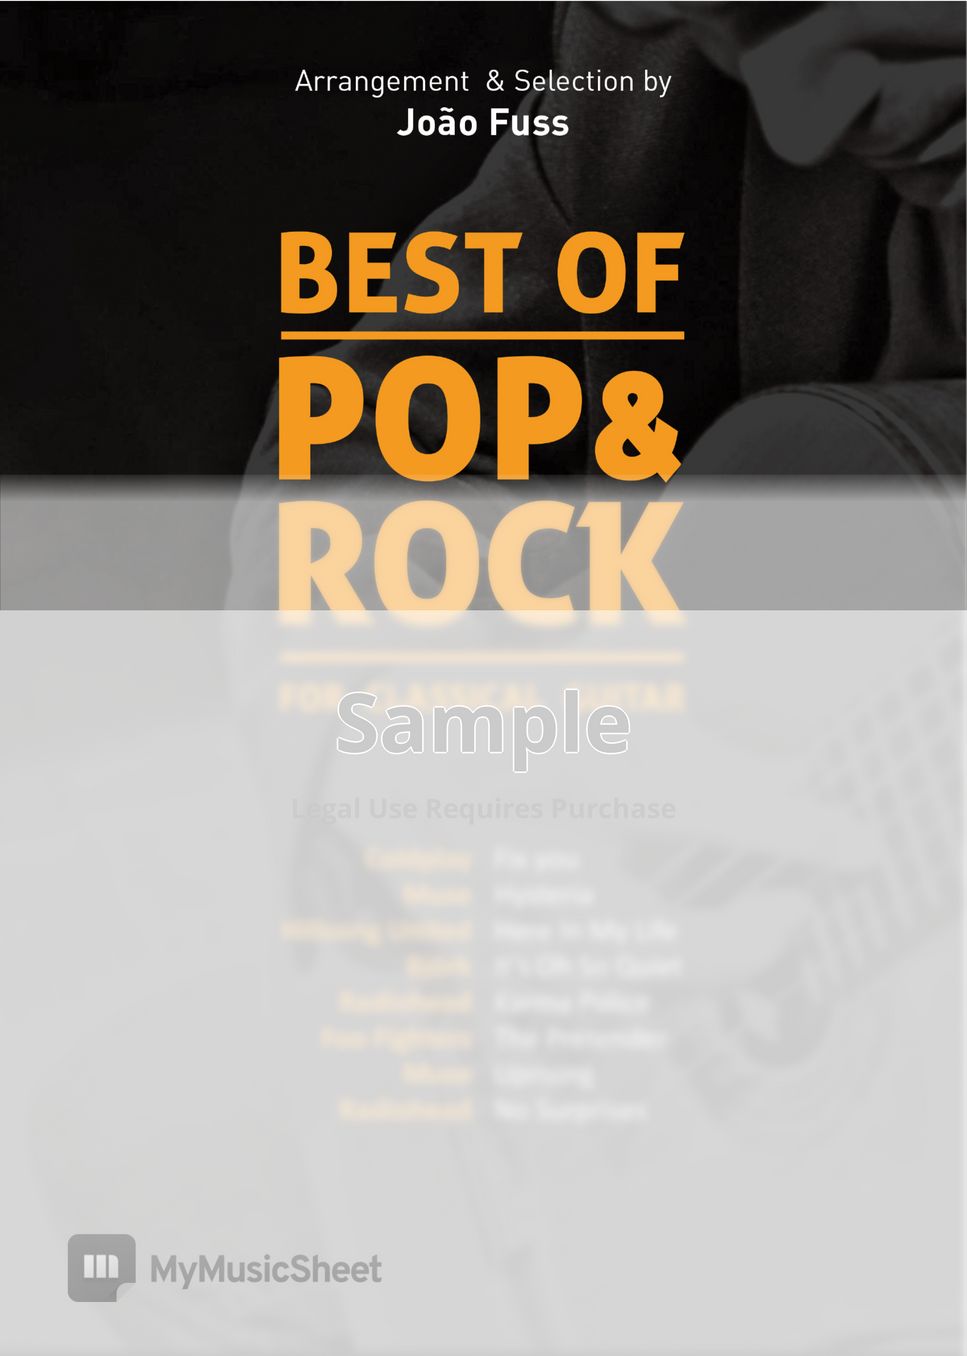 Fix you - ColdPlay - The Best of Pop/Rock for Classical Guitar by João Fuss by João Fuss